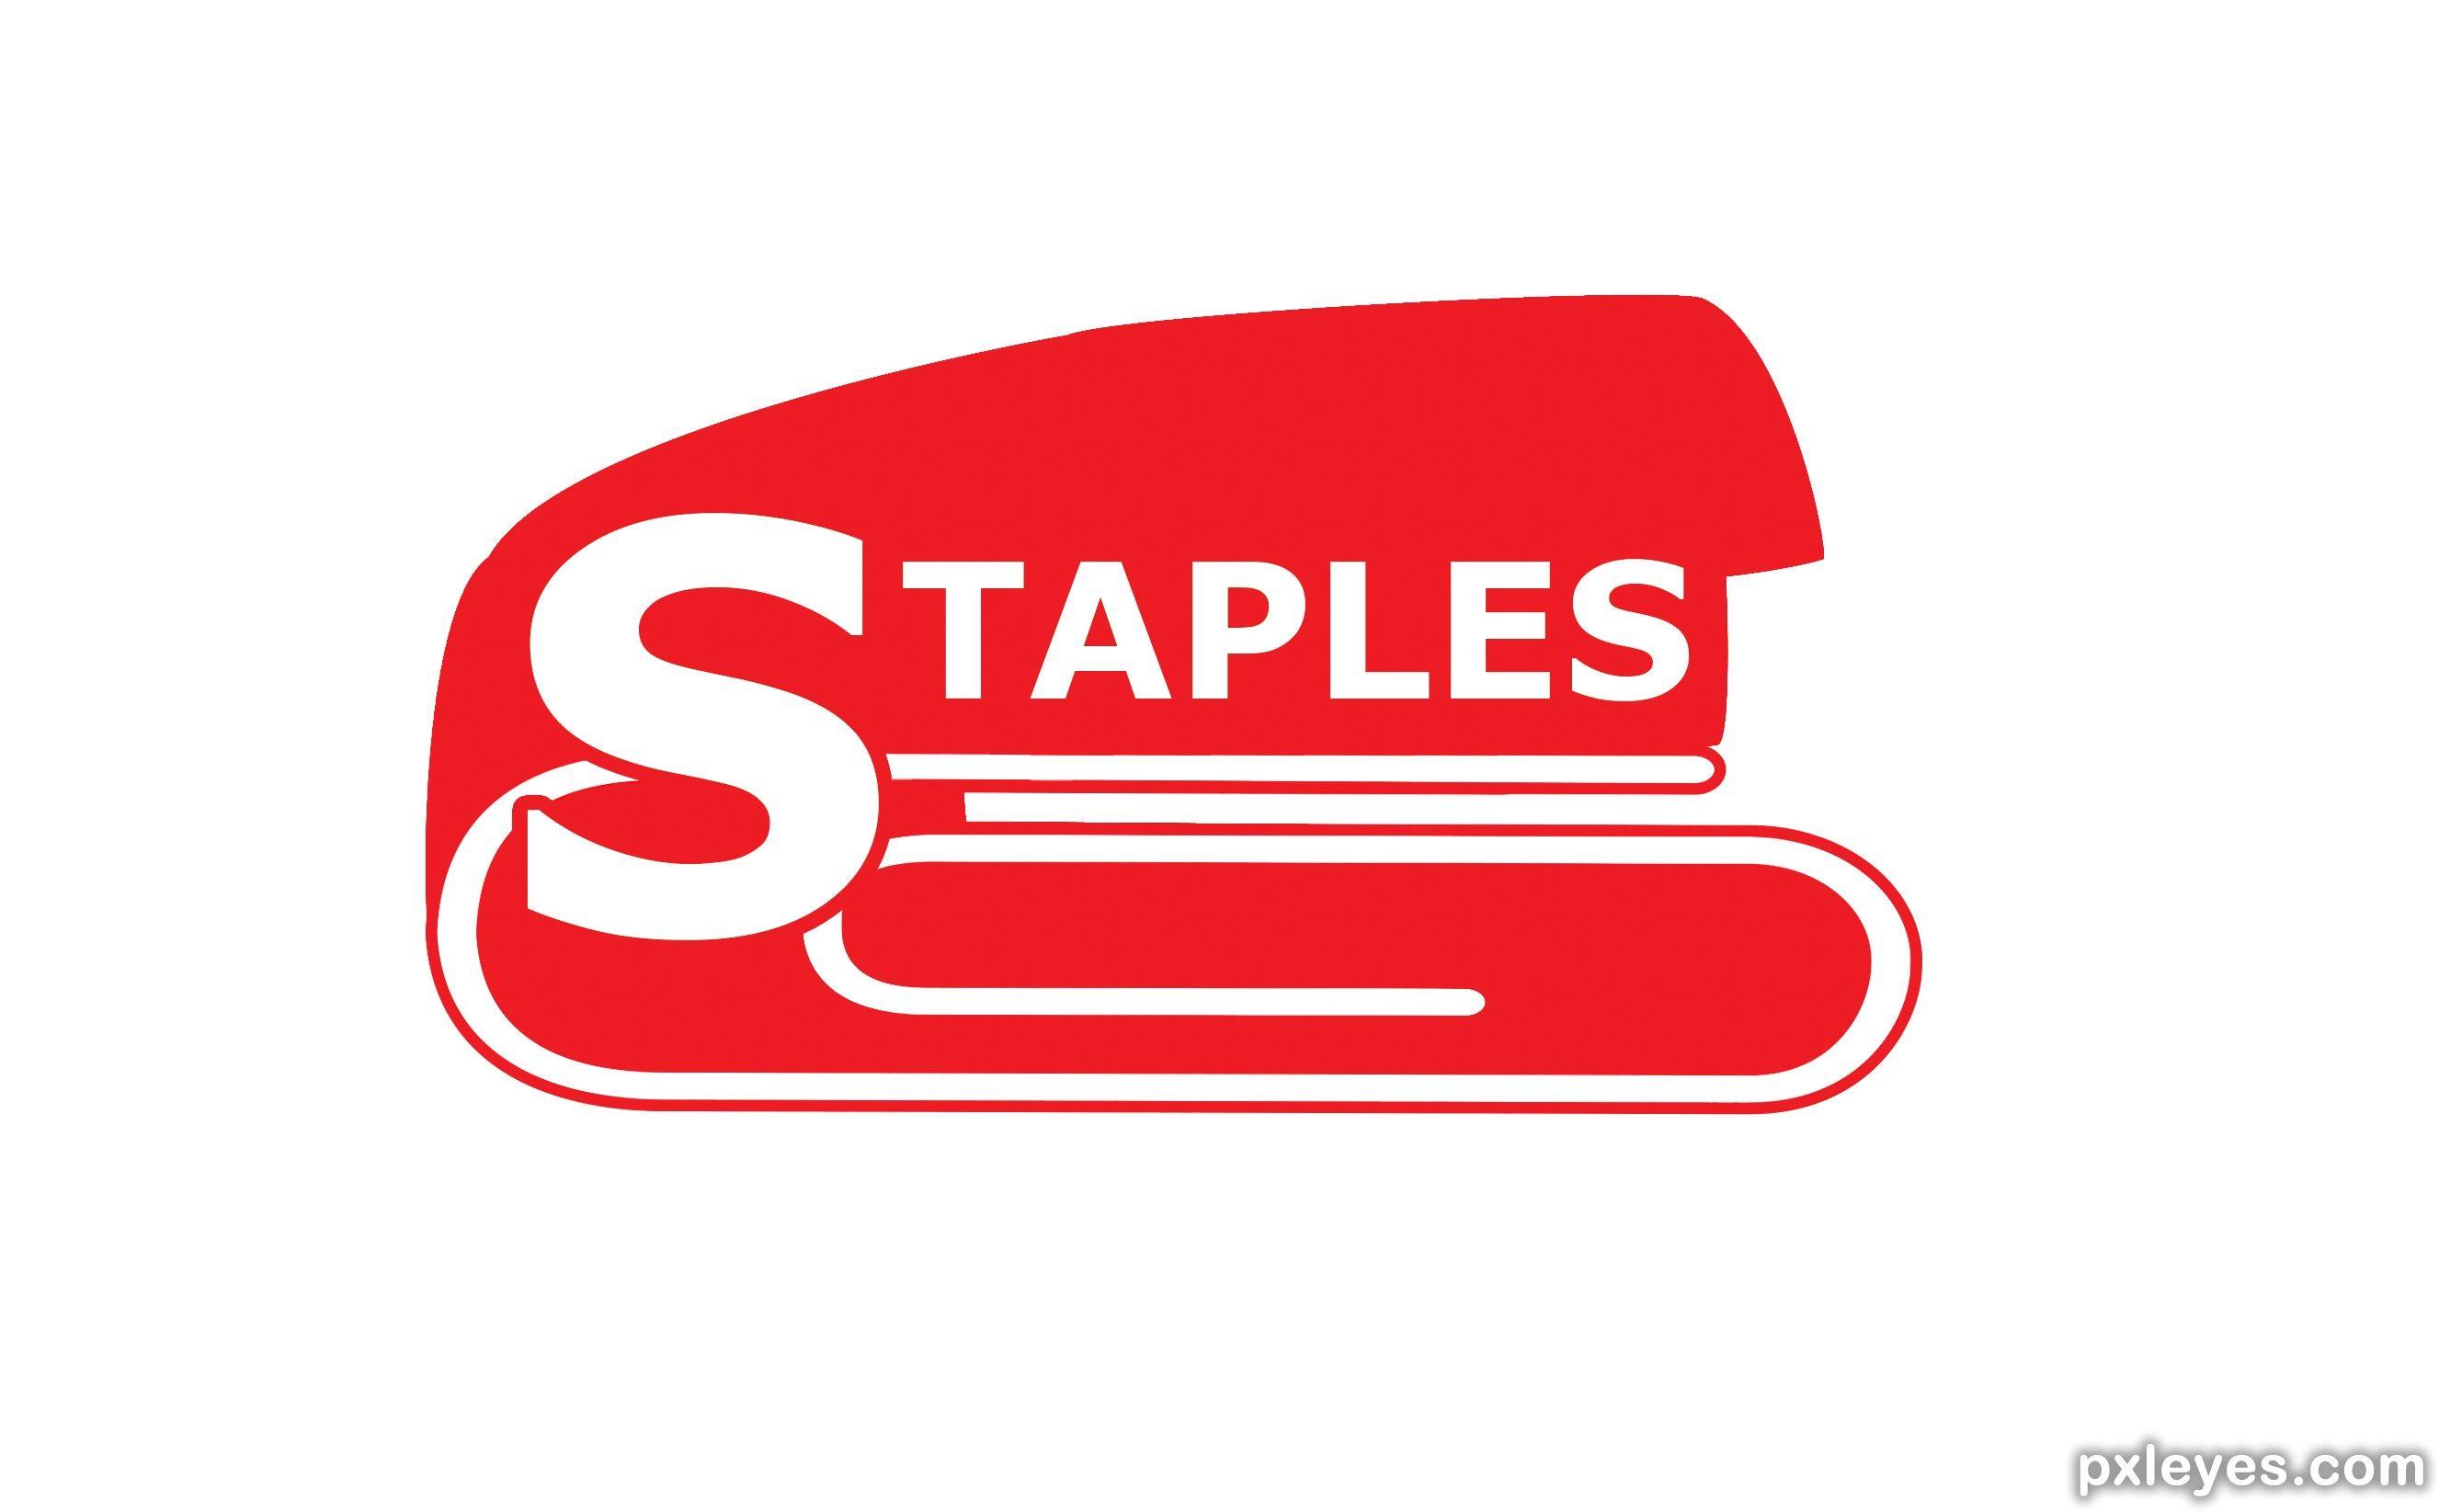 Staples Logo - Staples picture, by rturnbow for: logo remix photoshop contest ...